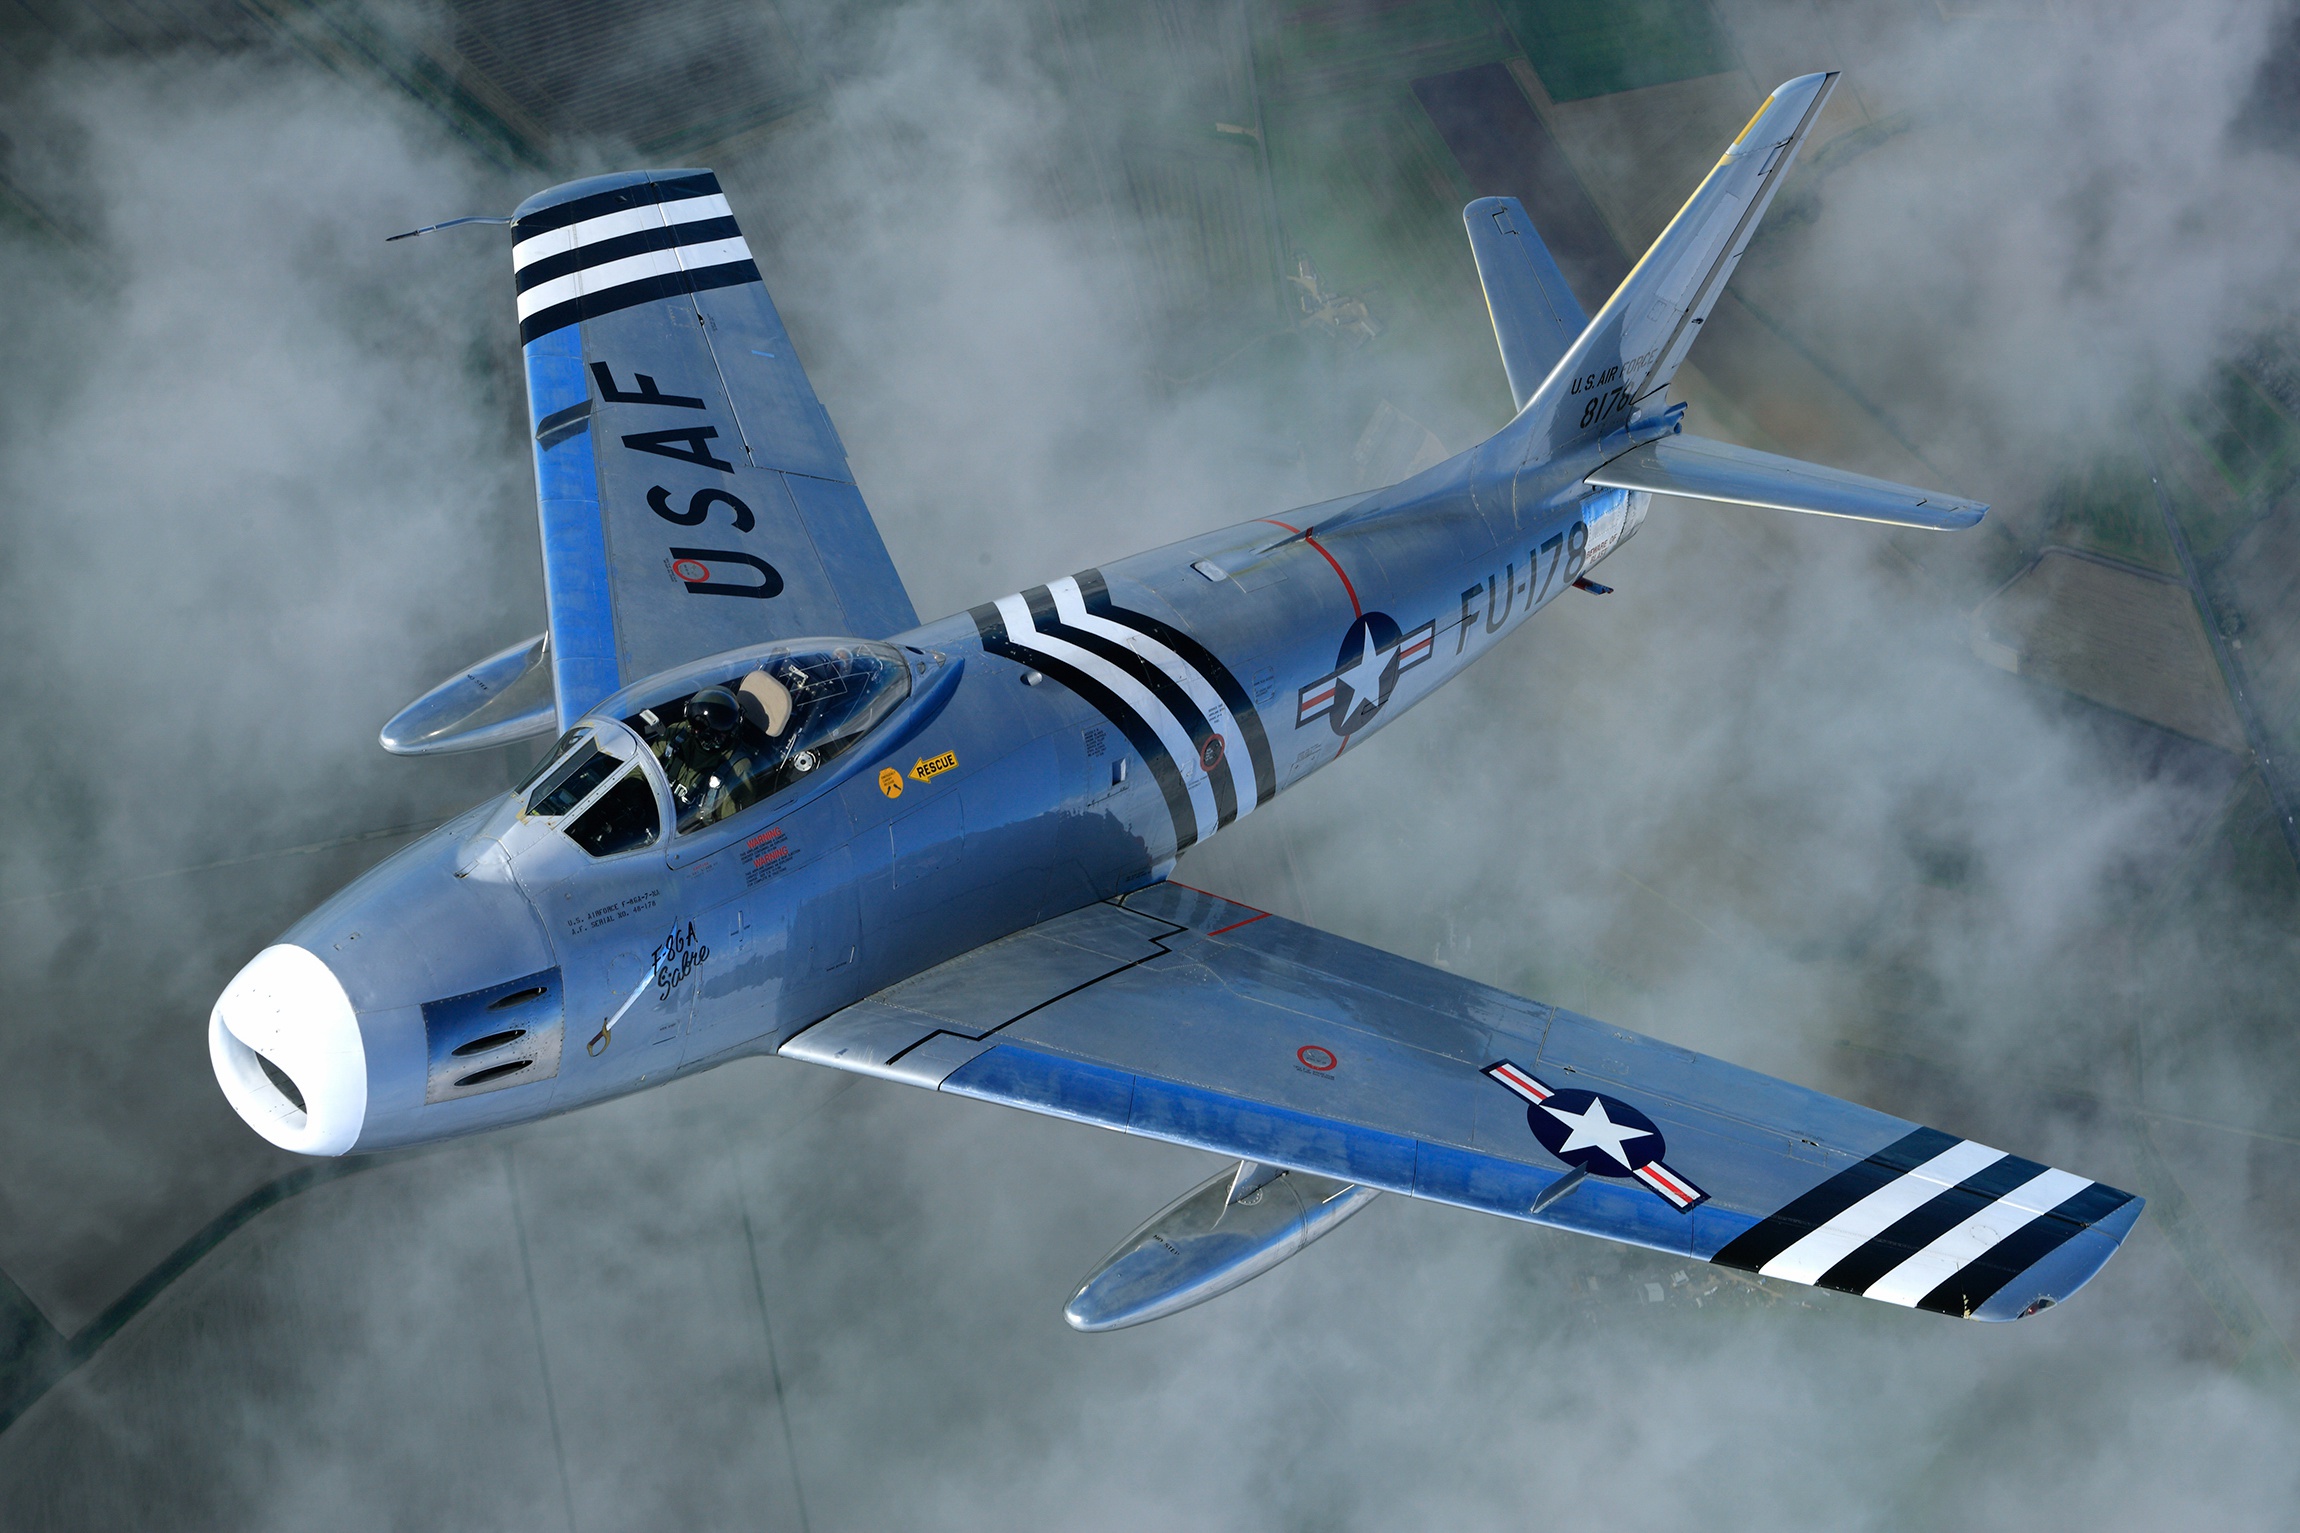 military, north american f 86 sabre, aircraft, jet fighter, warplane, jet fighters